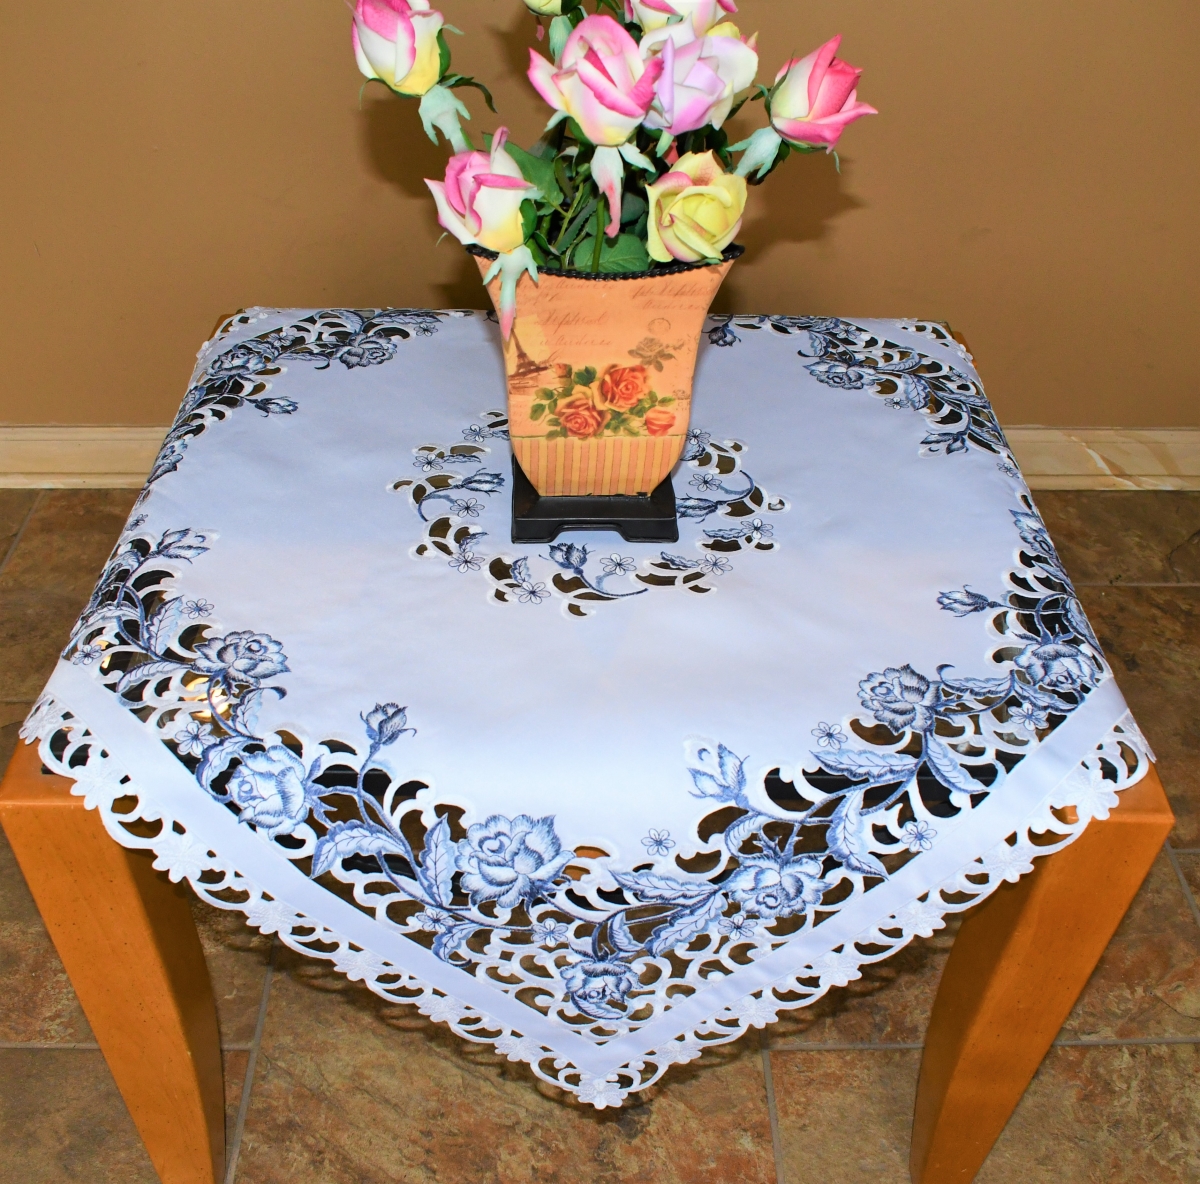 Picture of Sinobrite H8459-42x42SQ 42 x 42 in. Blue Rose on White Fabric Square Table Topper